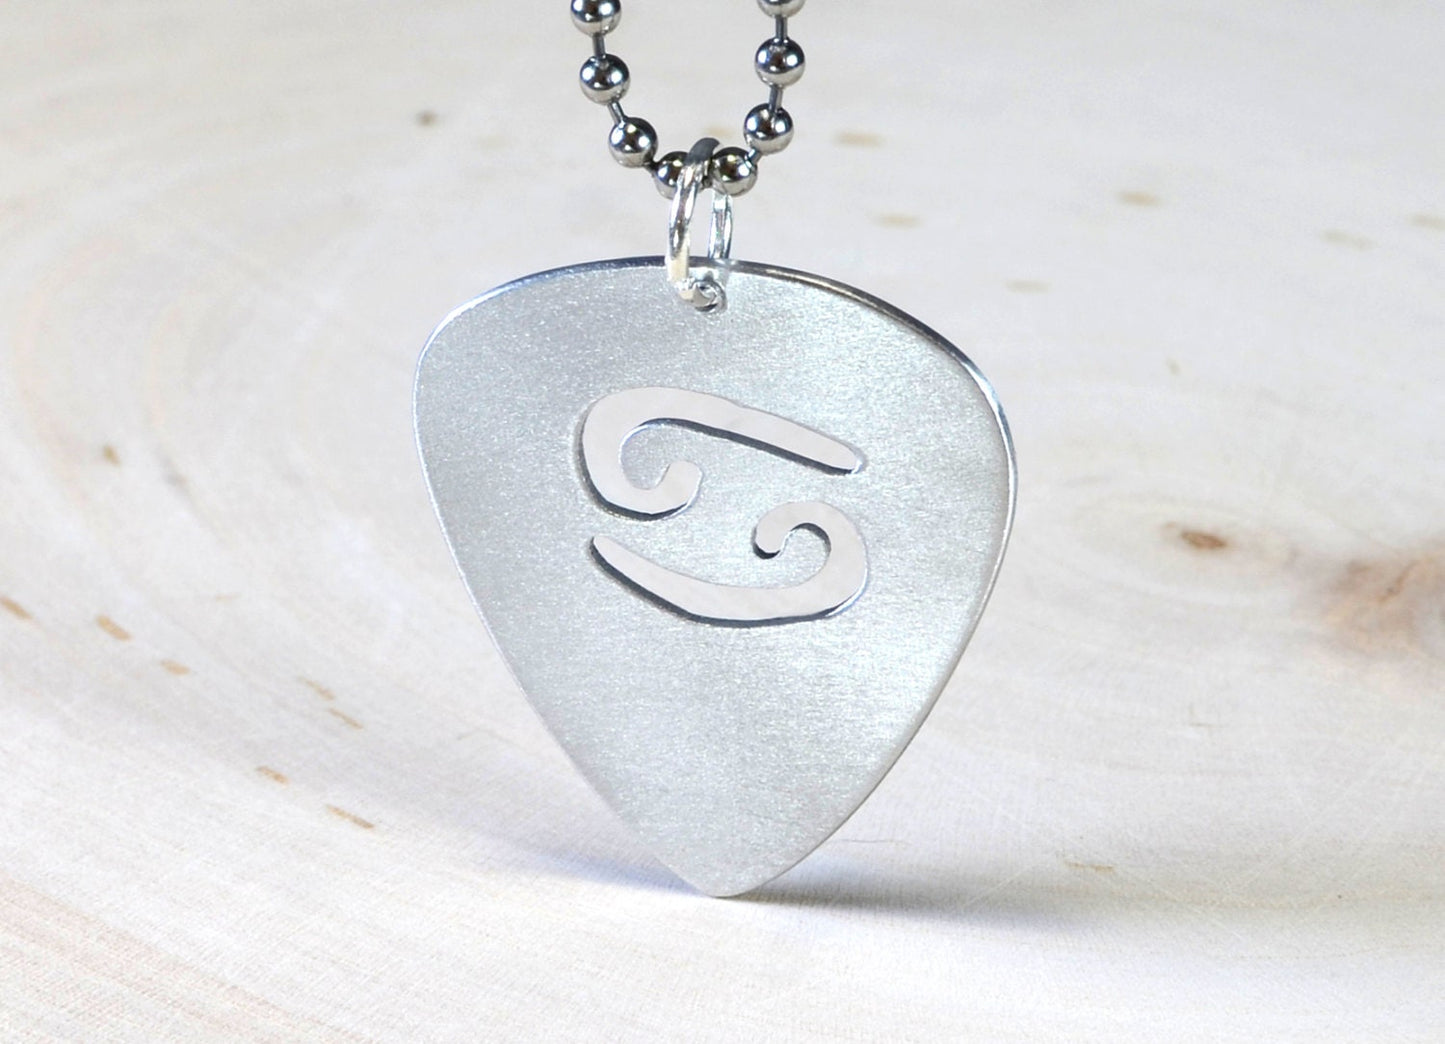 Zodiac sign guitar pick necklace with personalized astrology theme in various metals